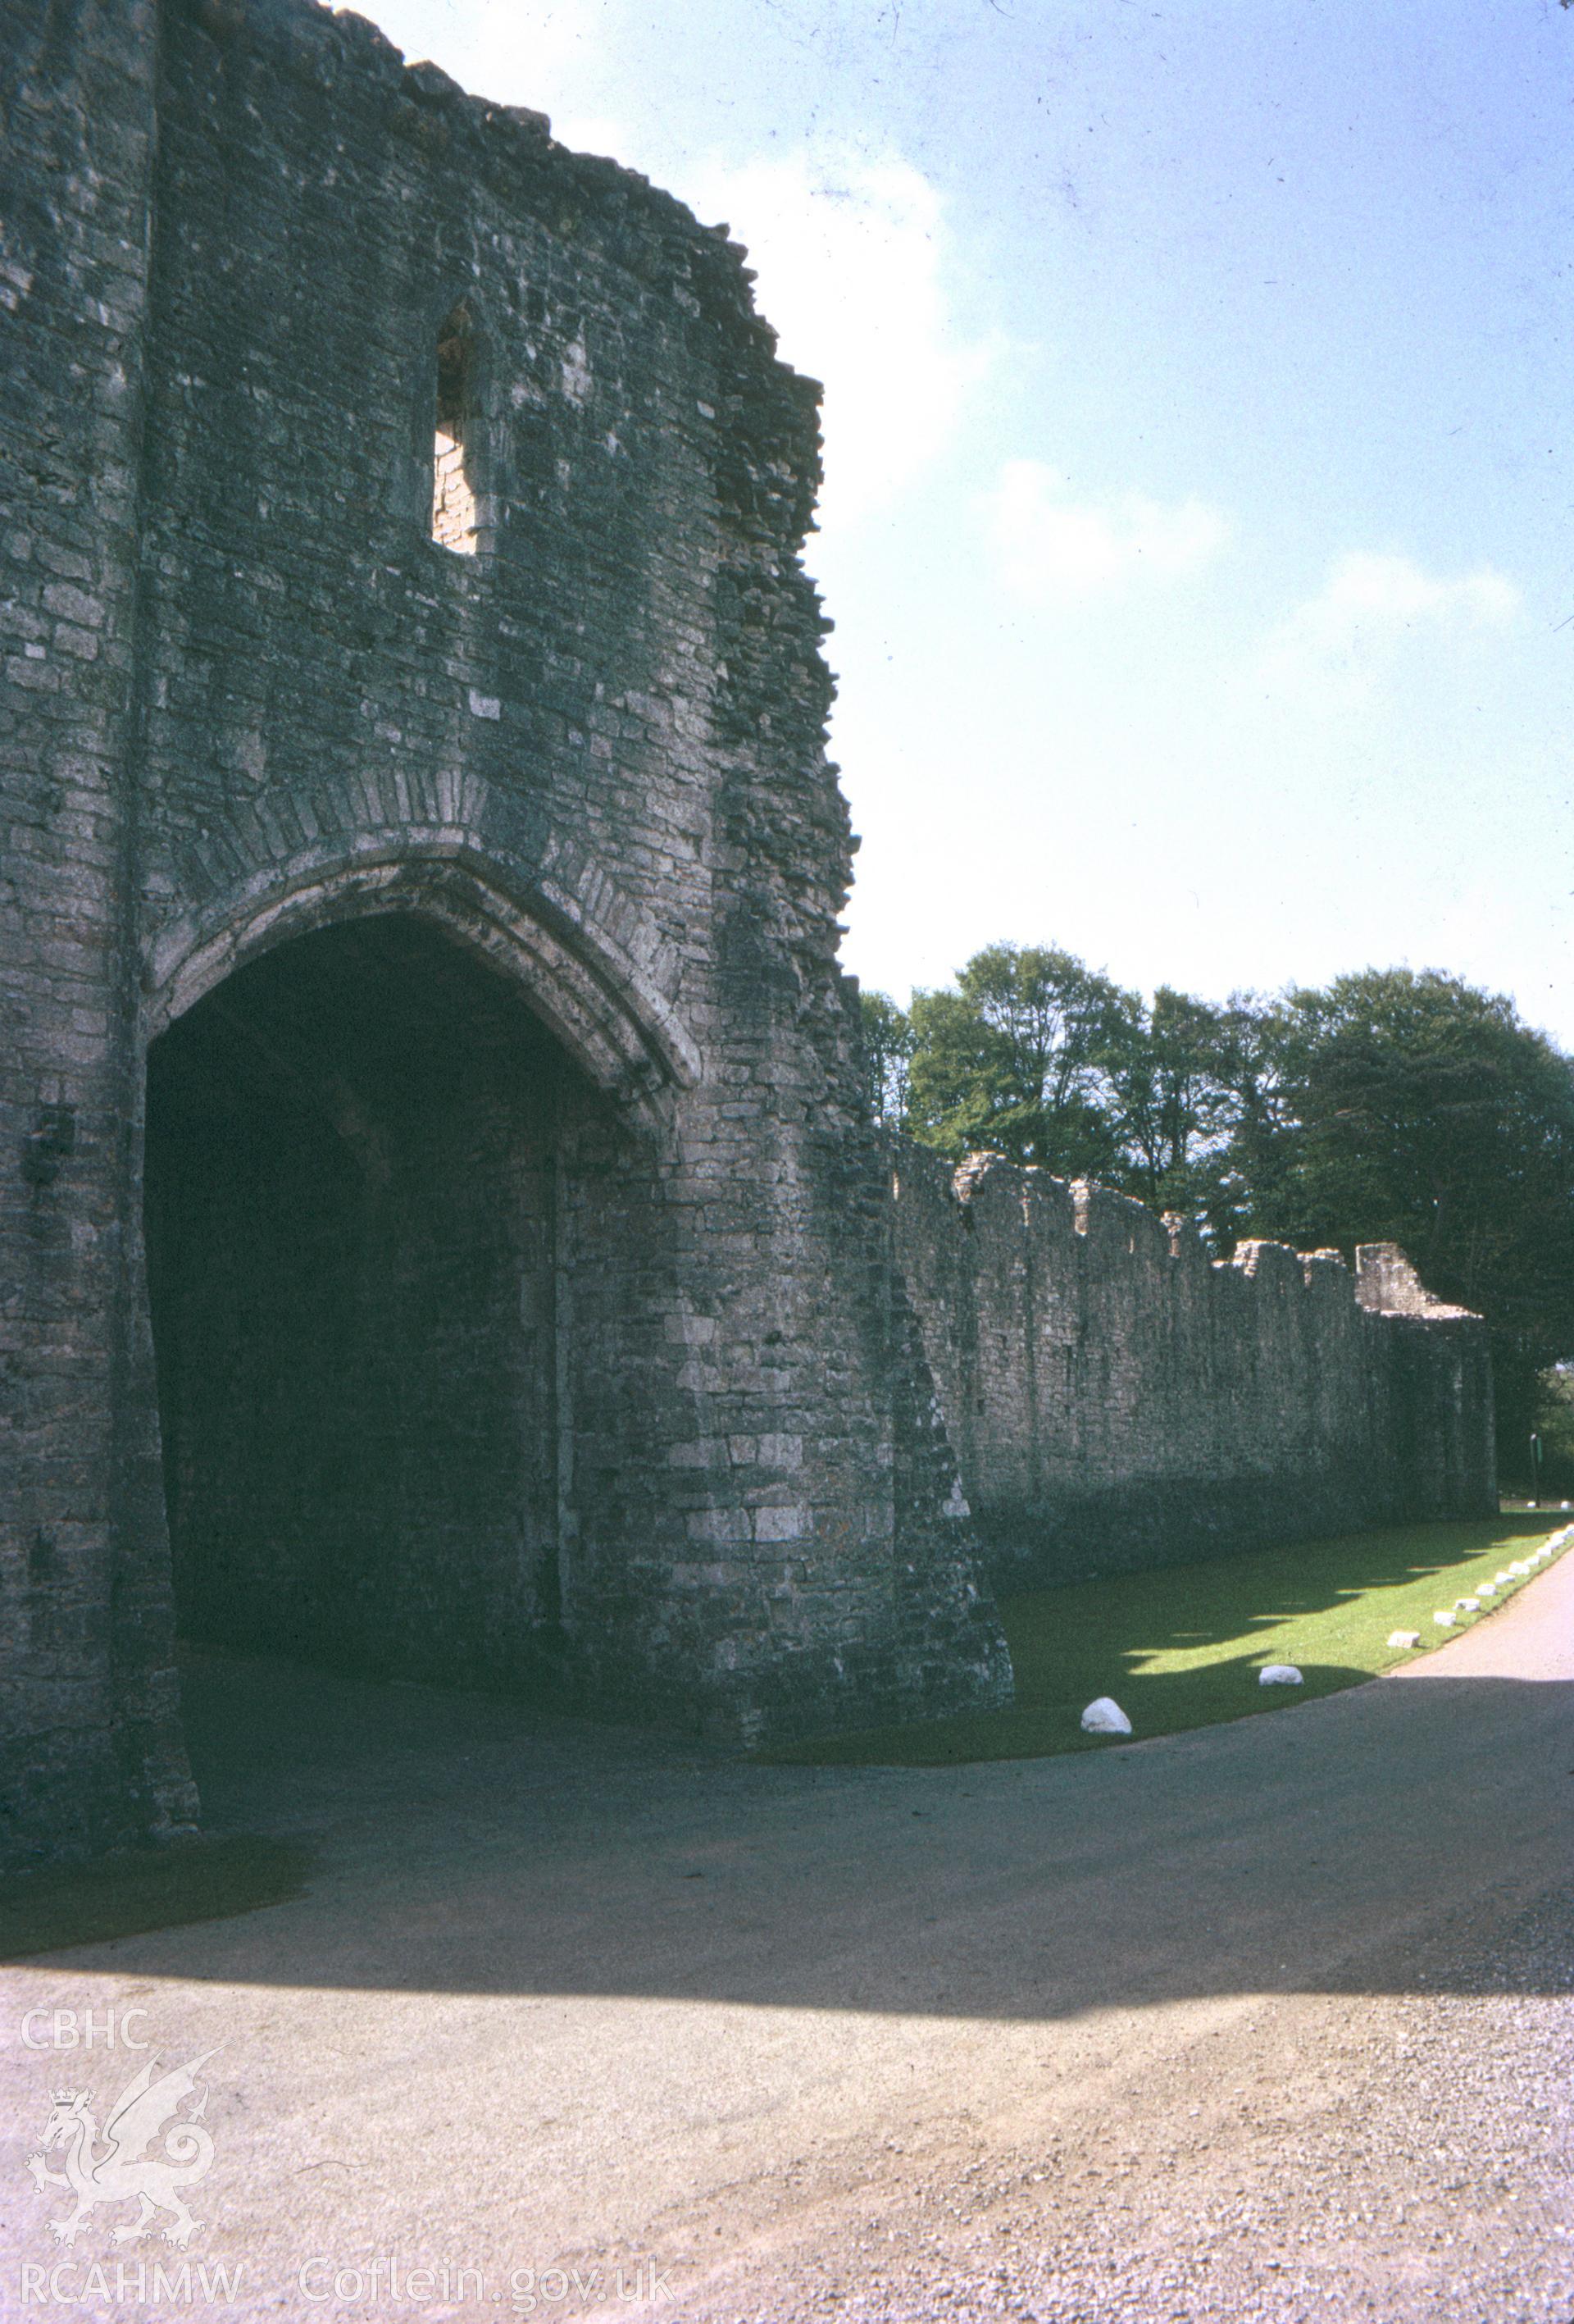 Colour slide showing Ewenny Priory.